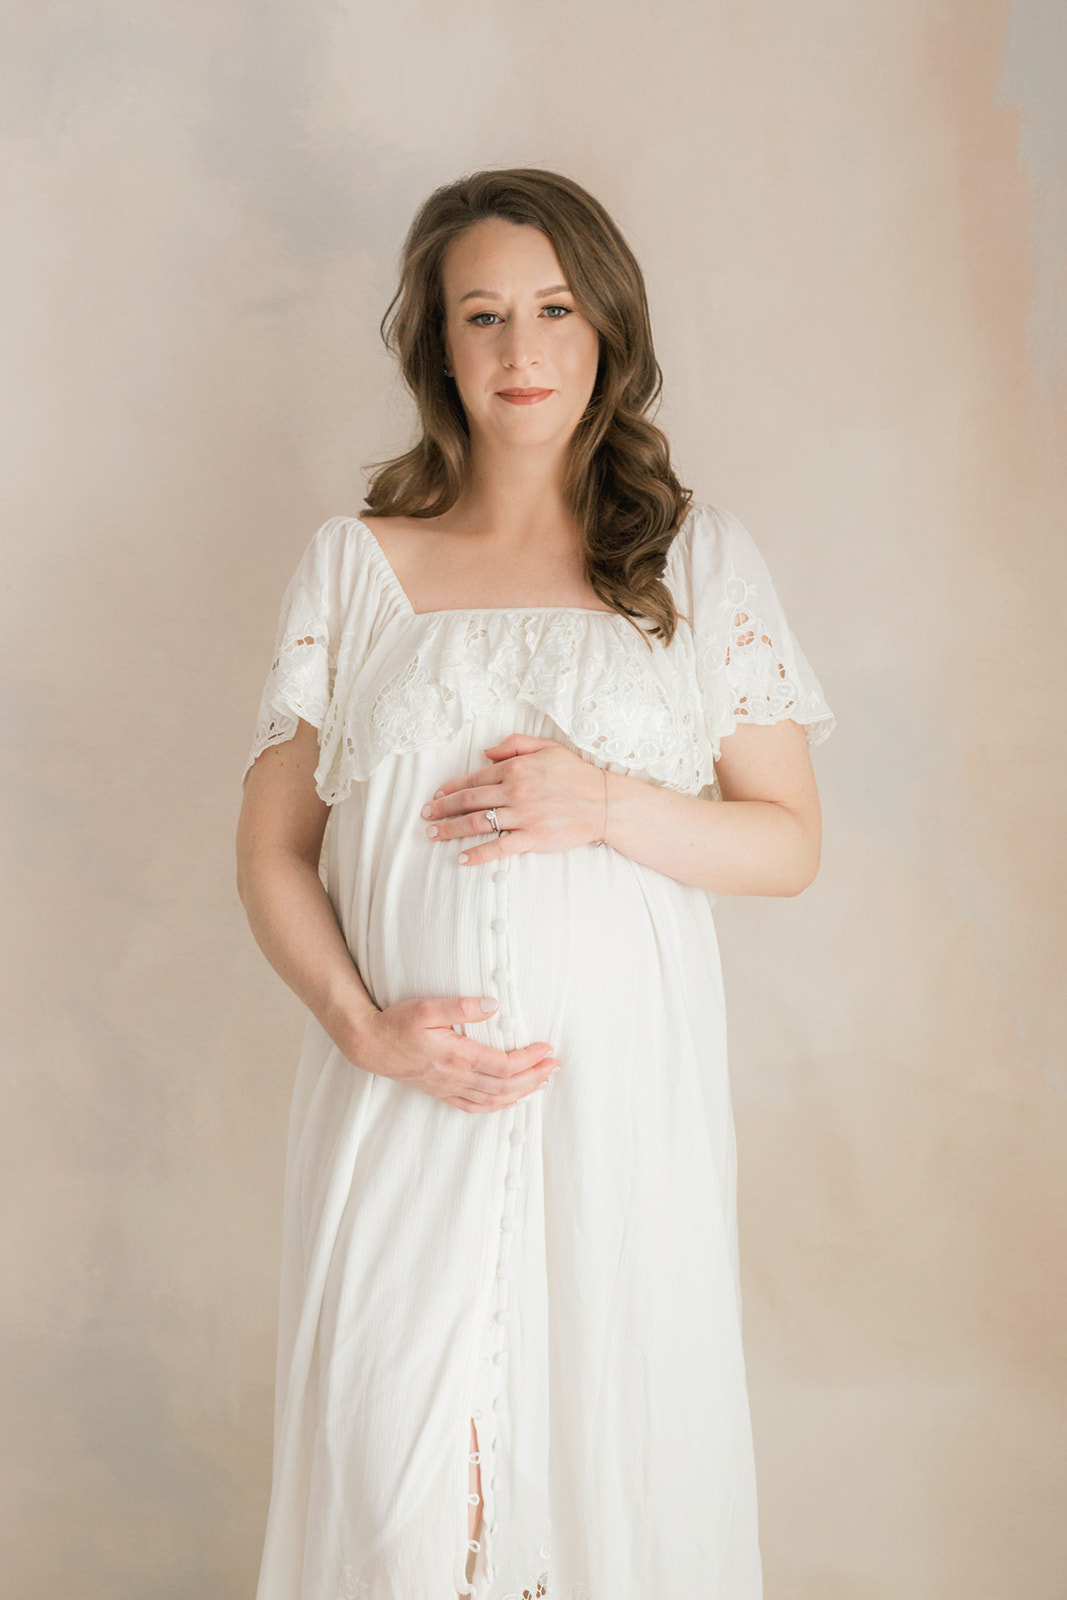 A mom to be in a white maternity gown stands in a studio holding her bump thanks to IVF Pittsburgh